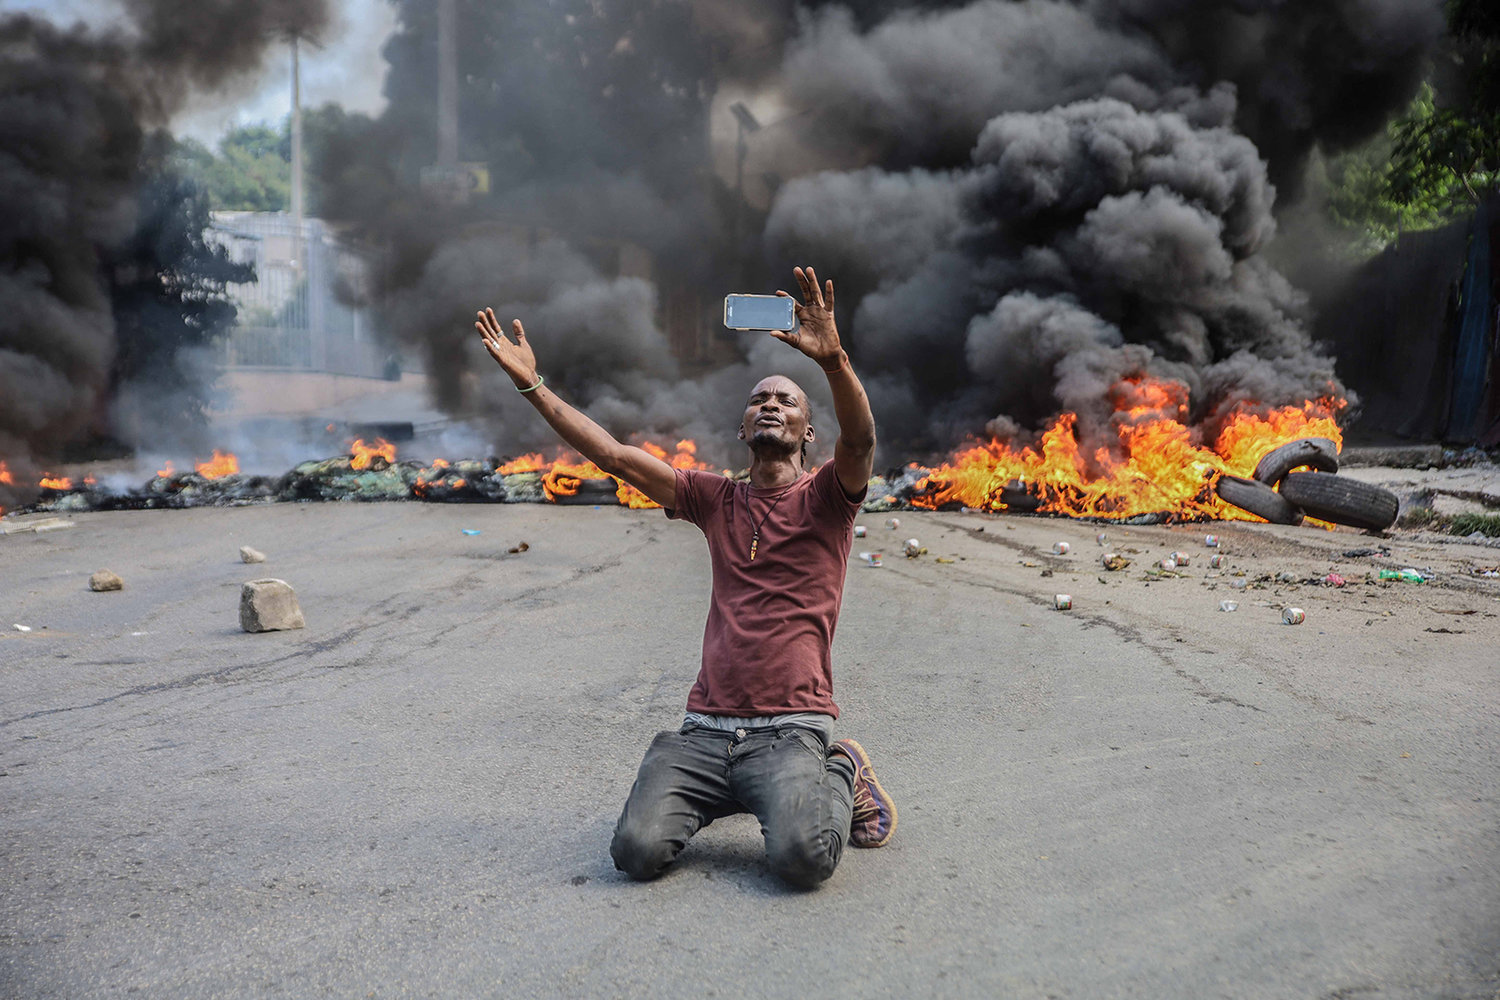 A man films himself in front of tires on fire during a general strike launched by several professional associations and companies to denounce insecurity in Port-au-Prince on Oct. 18, 2021. (Richard Pierrin/AFP via Getty Images/TNS)